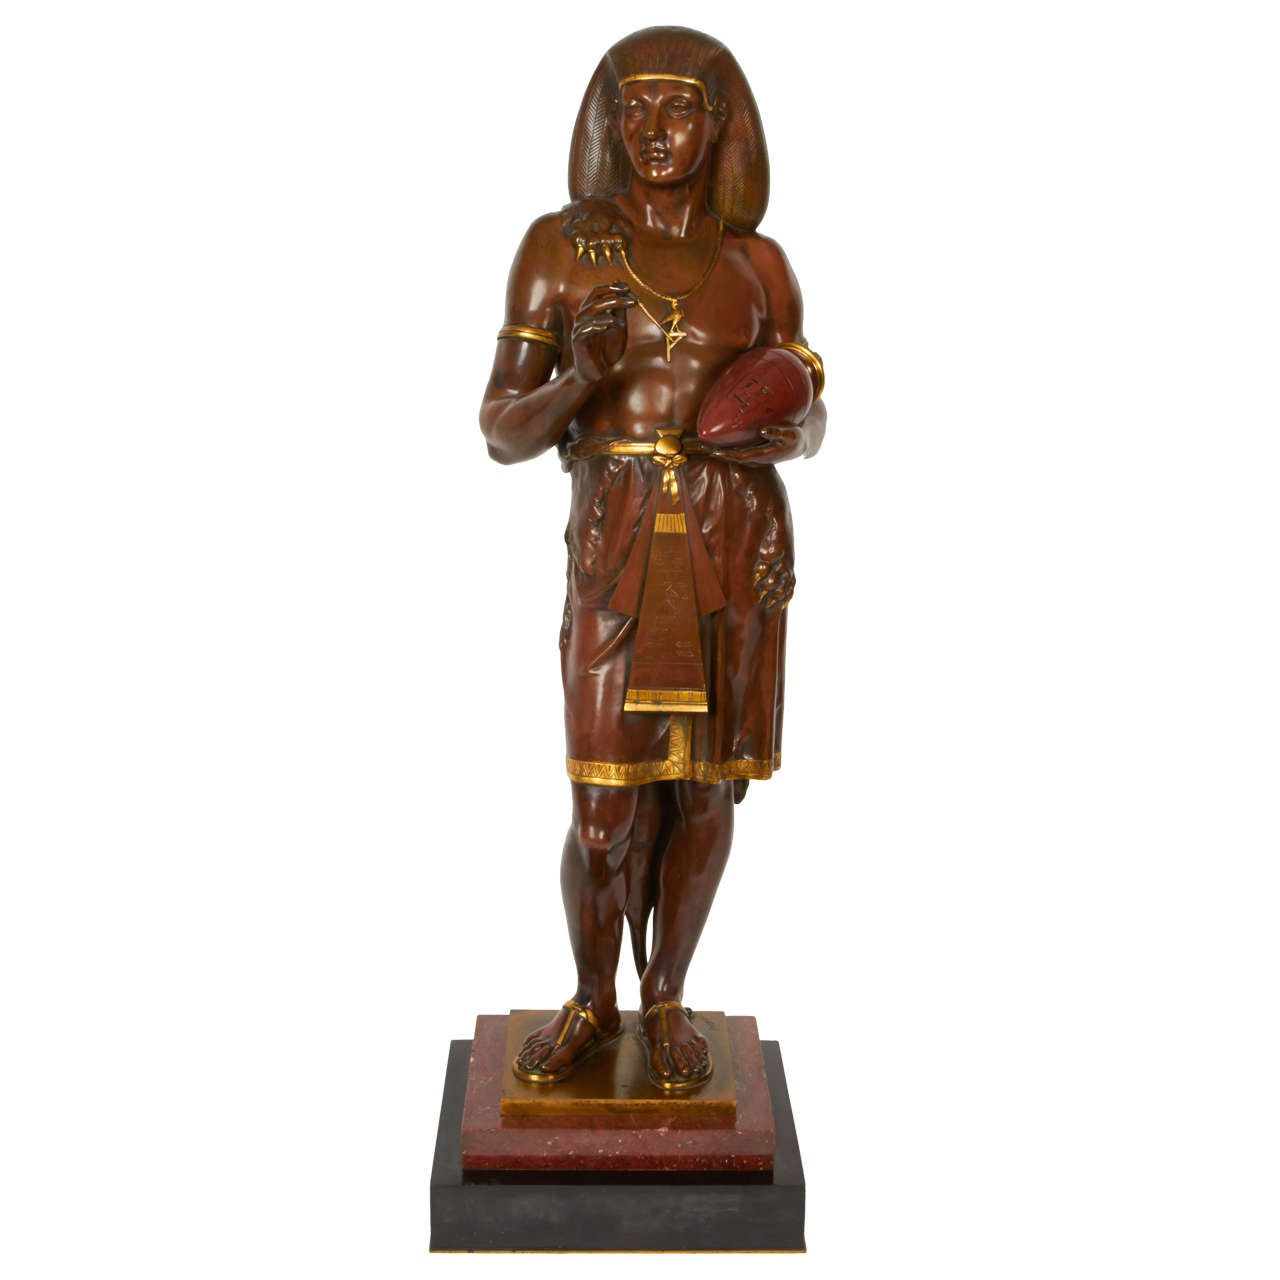 Emile Louis Picault, Bronze Figure of an Egyptian Scribe